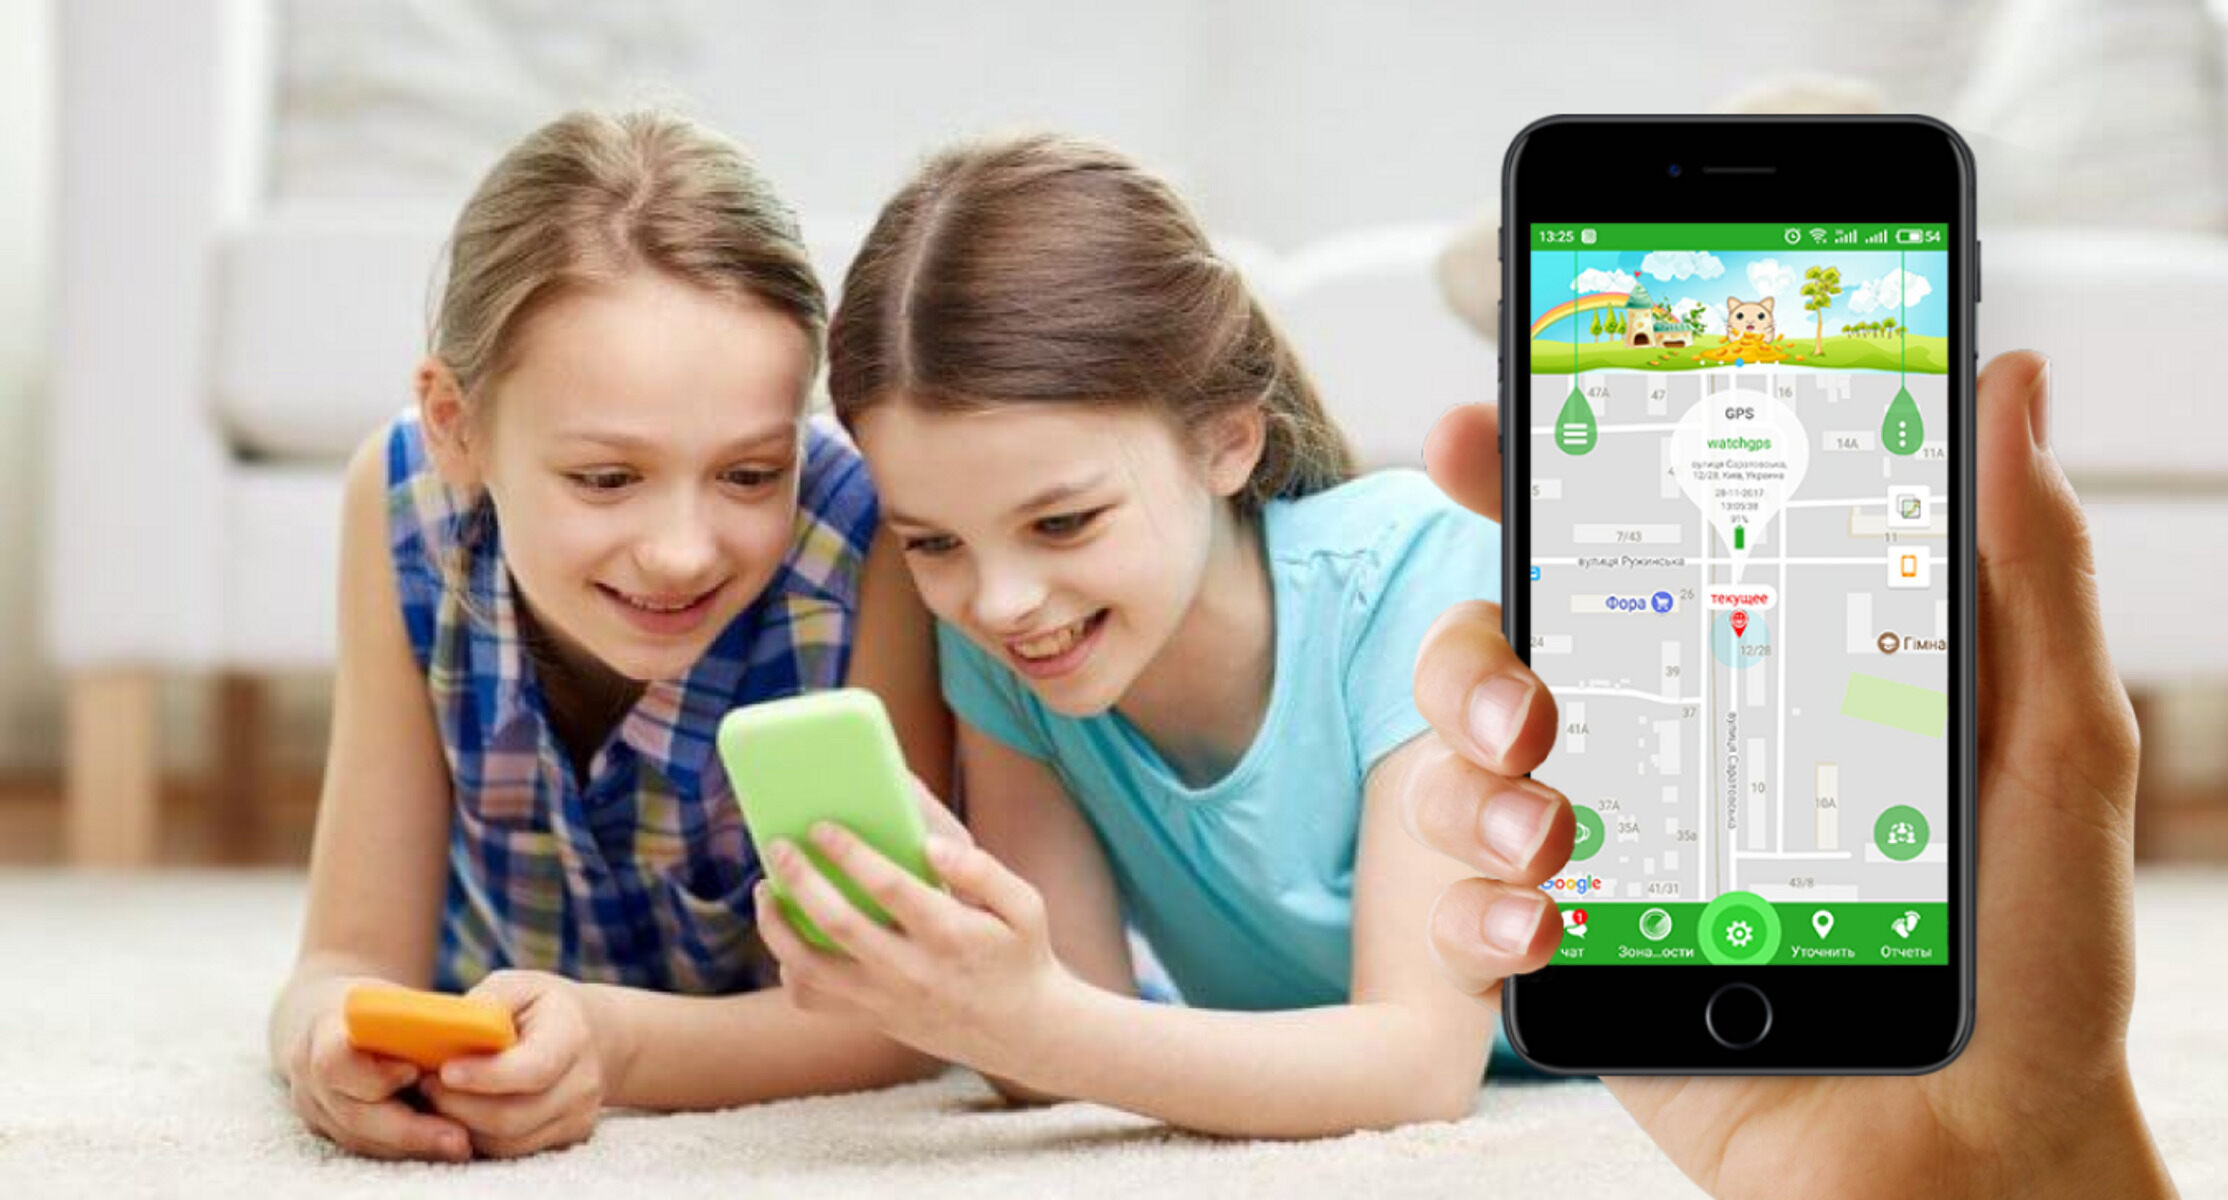 Parental Monitoring: A Guide On Putting A GPS Tracker On Your Child’s Phone